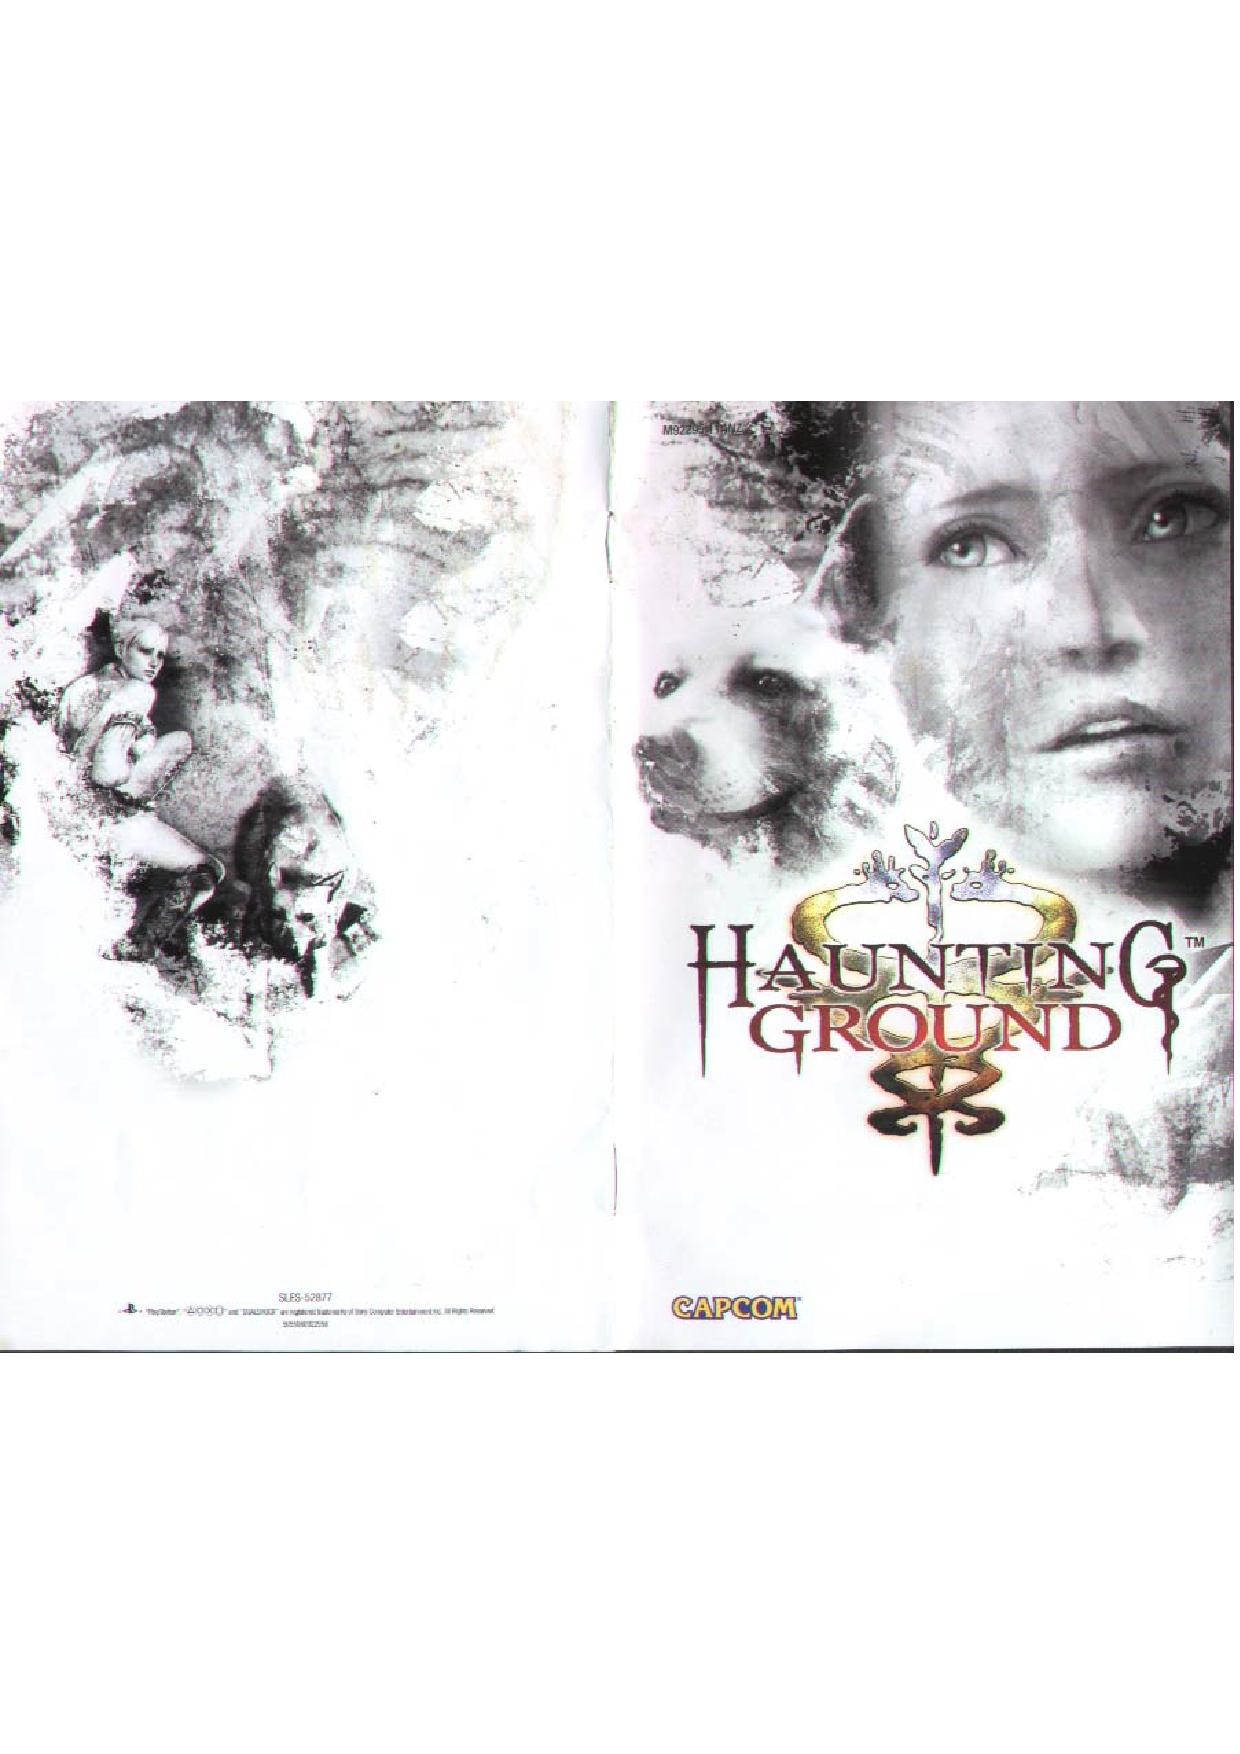 Games PS2 HAUNTING GROUND User Manual